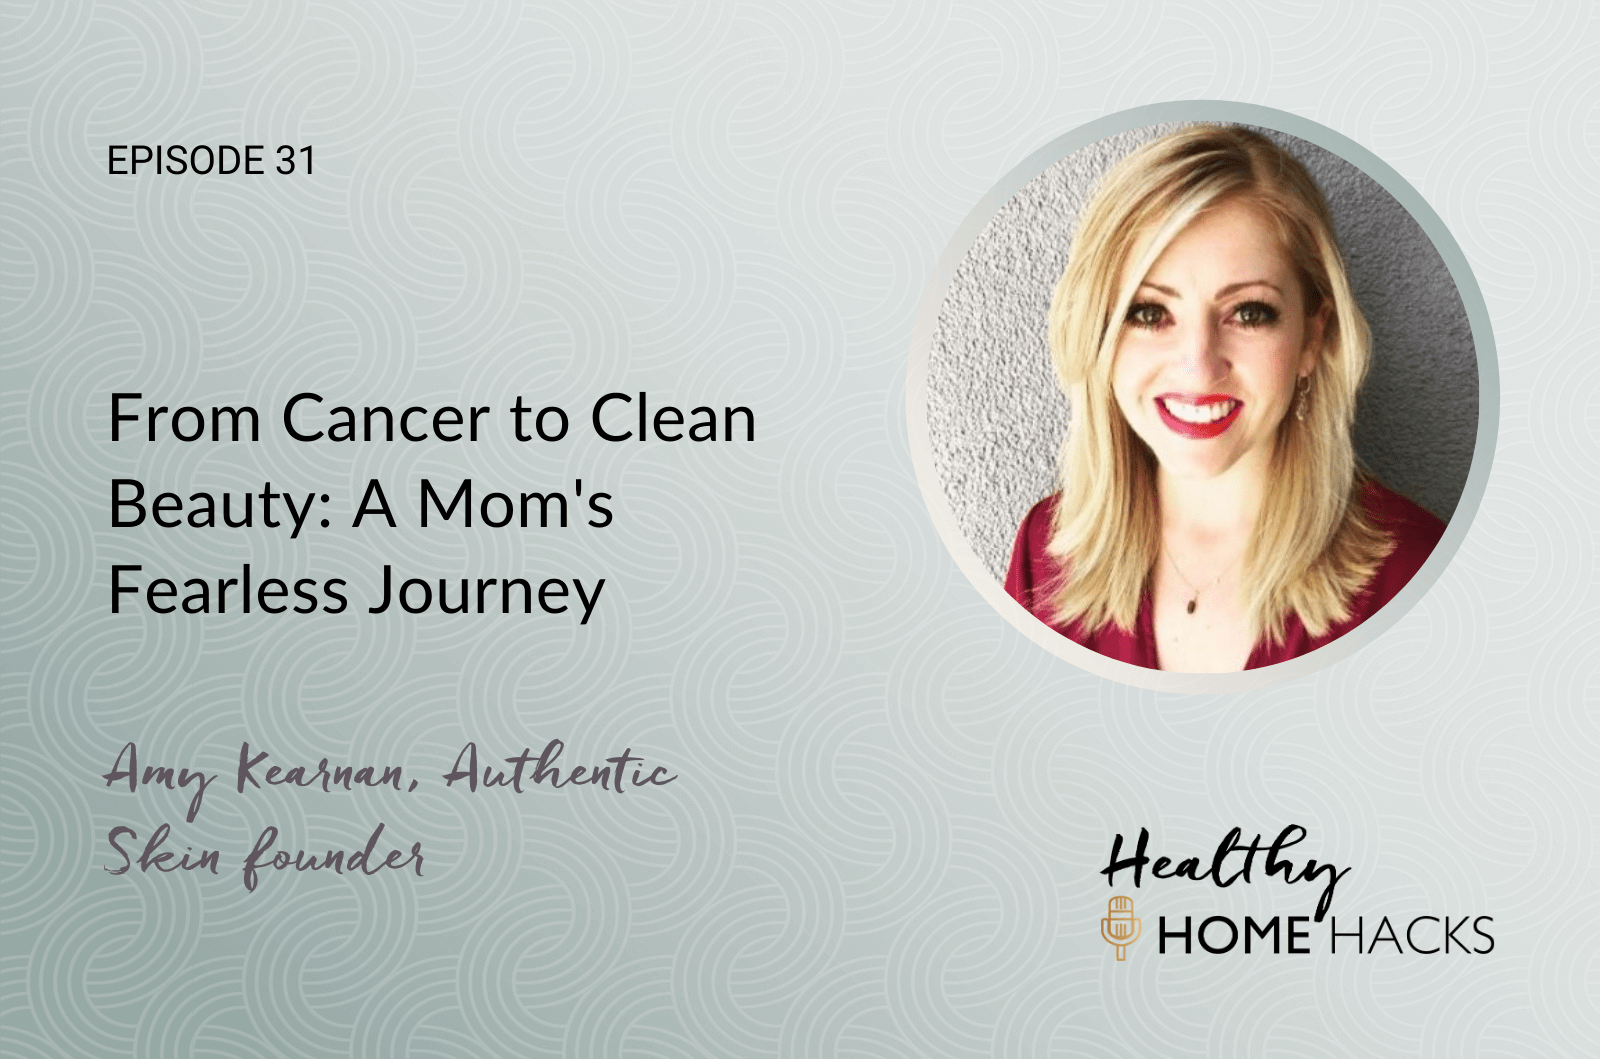 From Cancer to Clean Beauty: A Mom's Fearless Journey